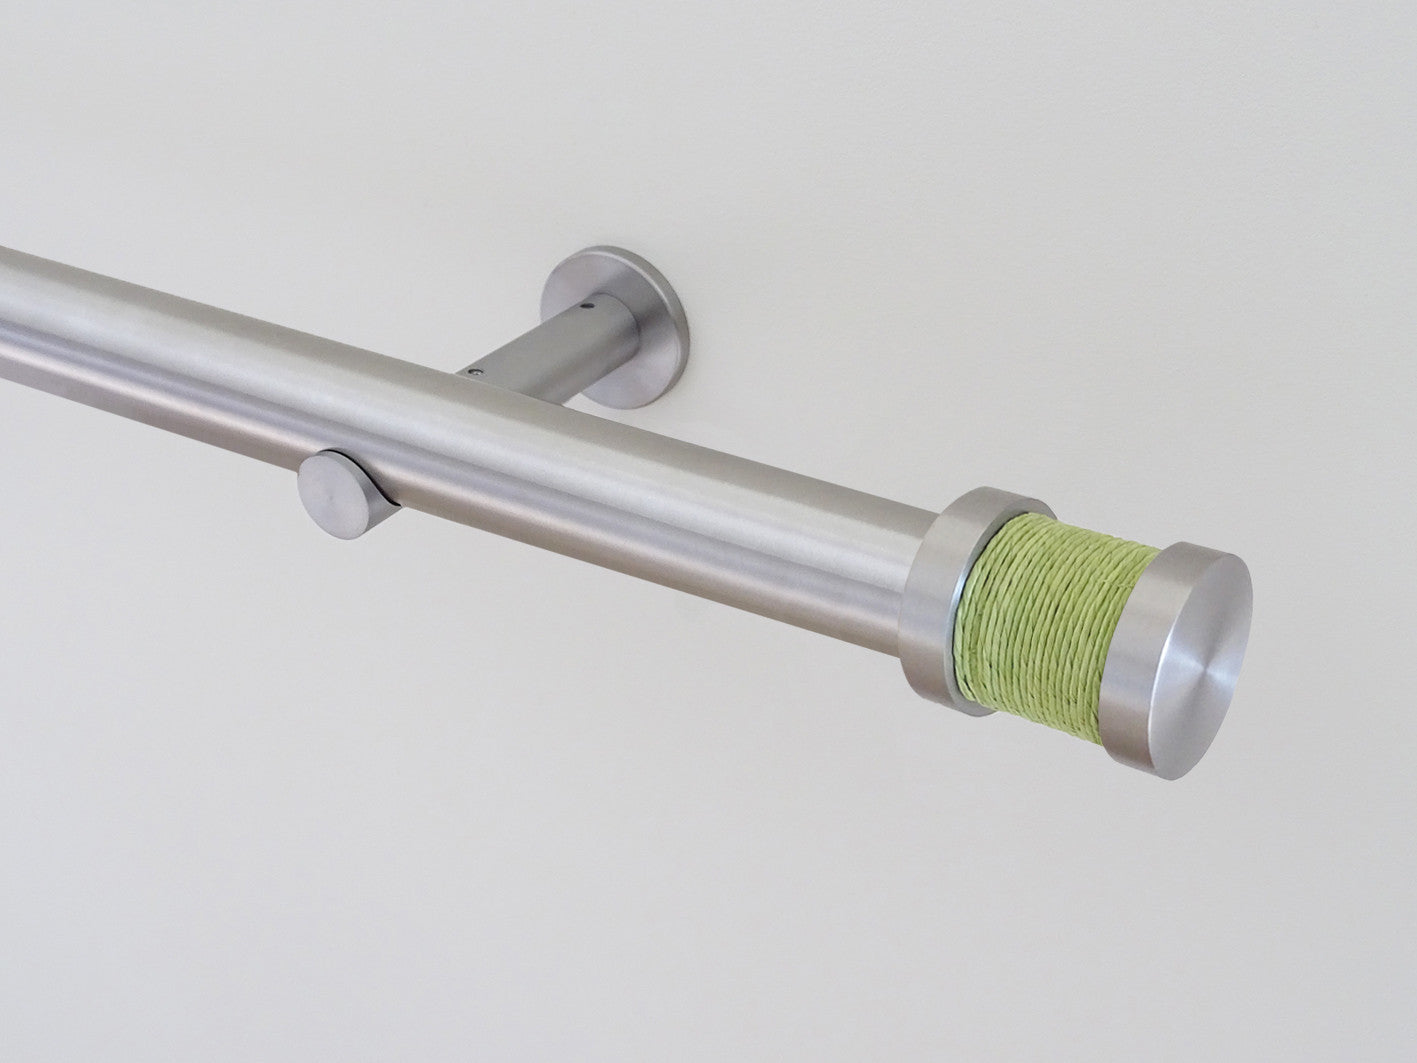 30mm diameter stainless steel curtain pole with avocado groove finials